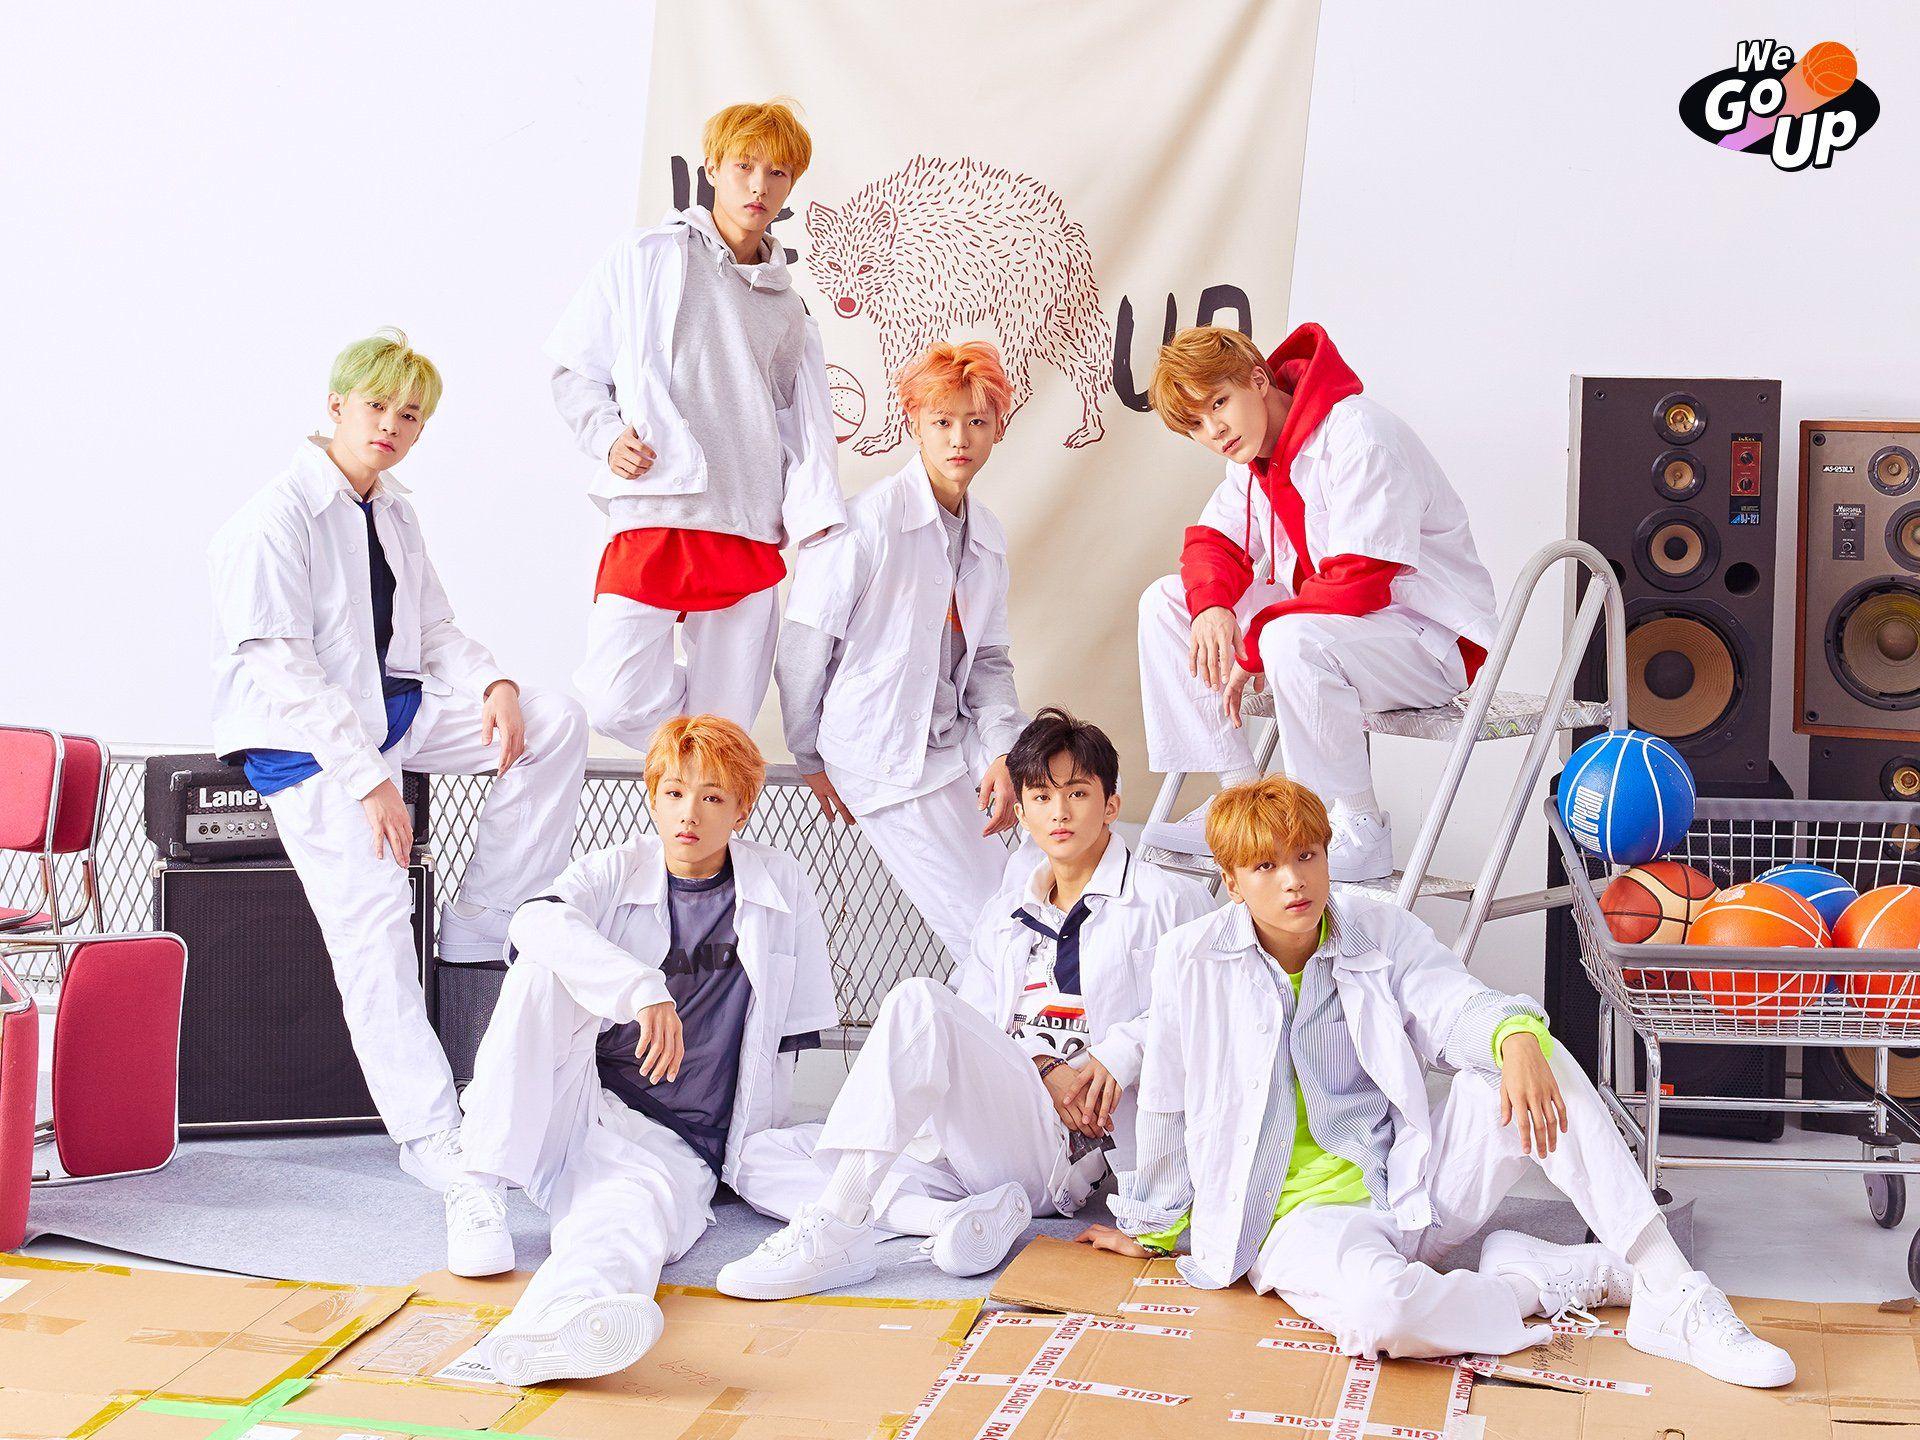 NCT Dream 'We Go Up' ccoemback image